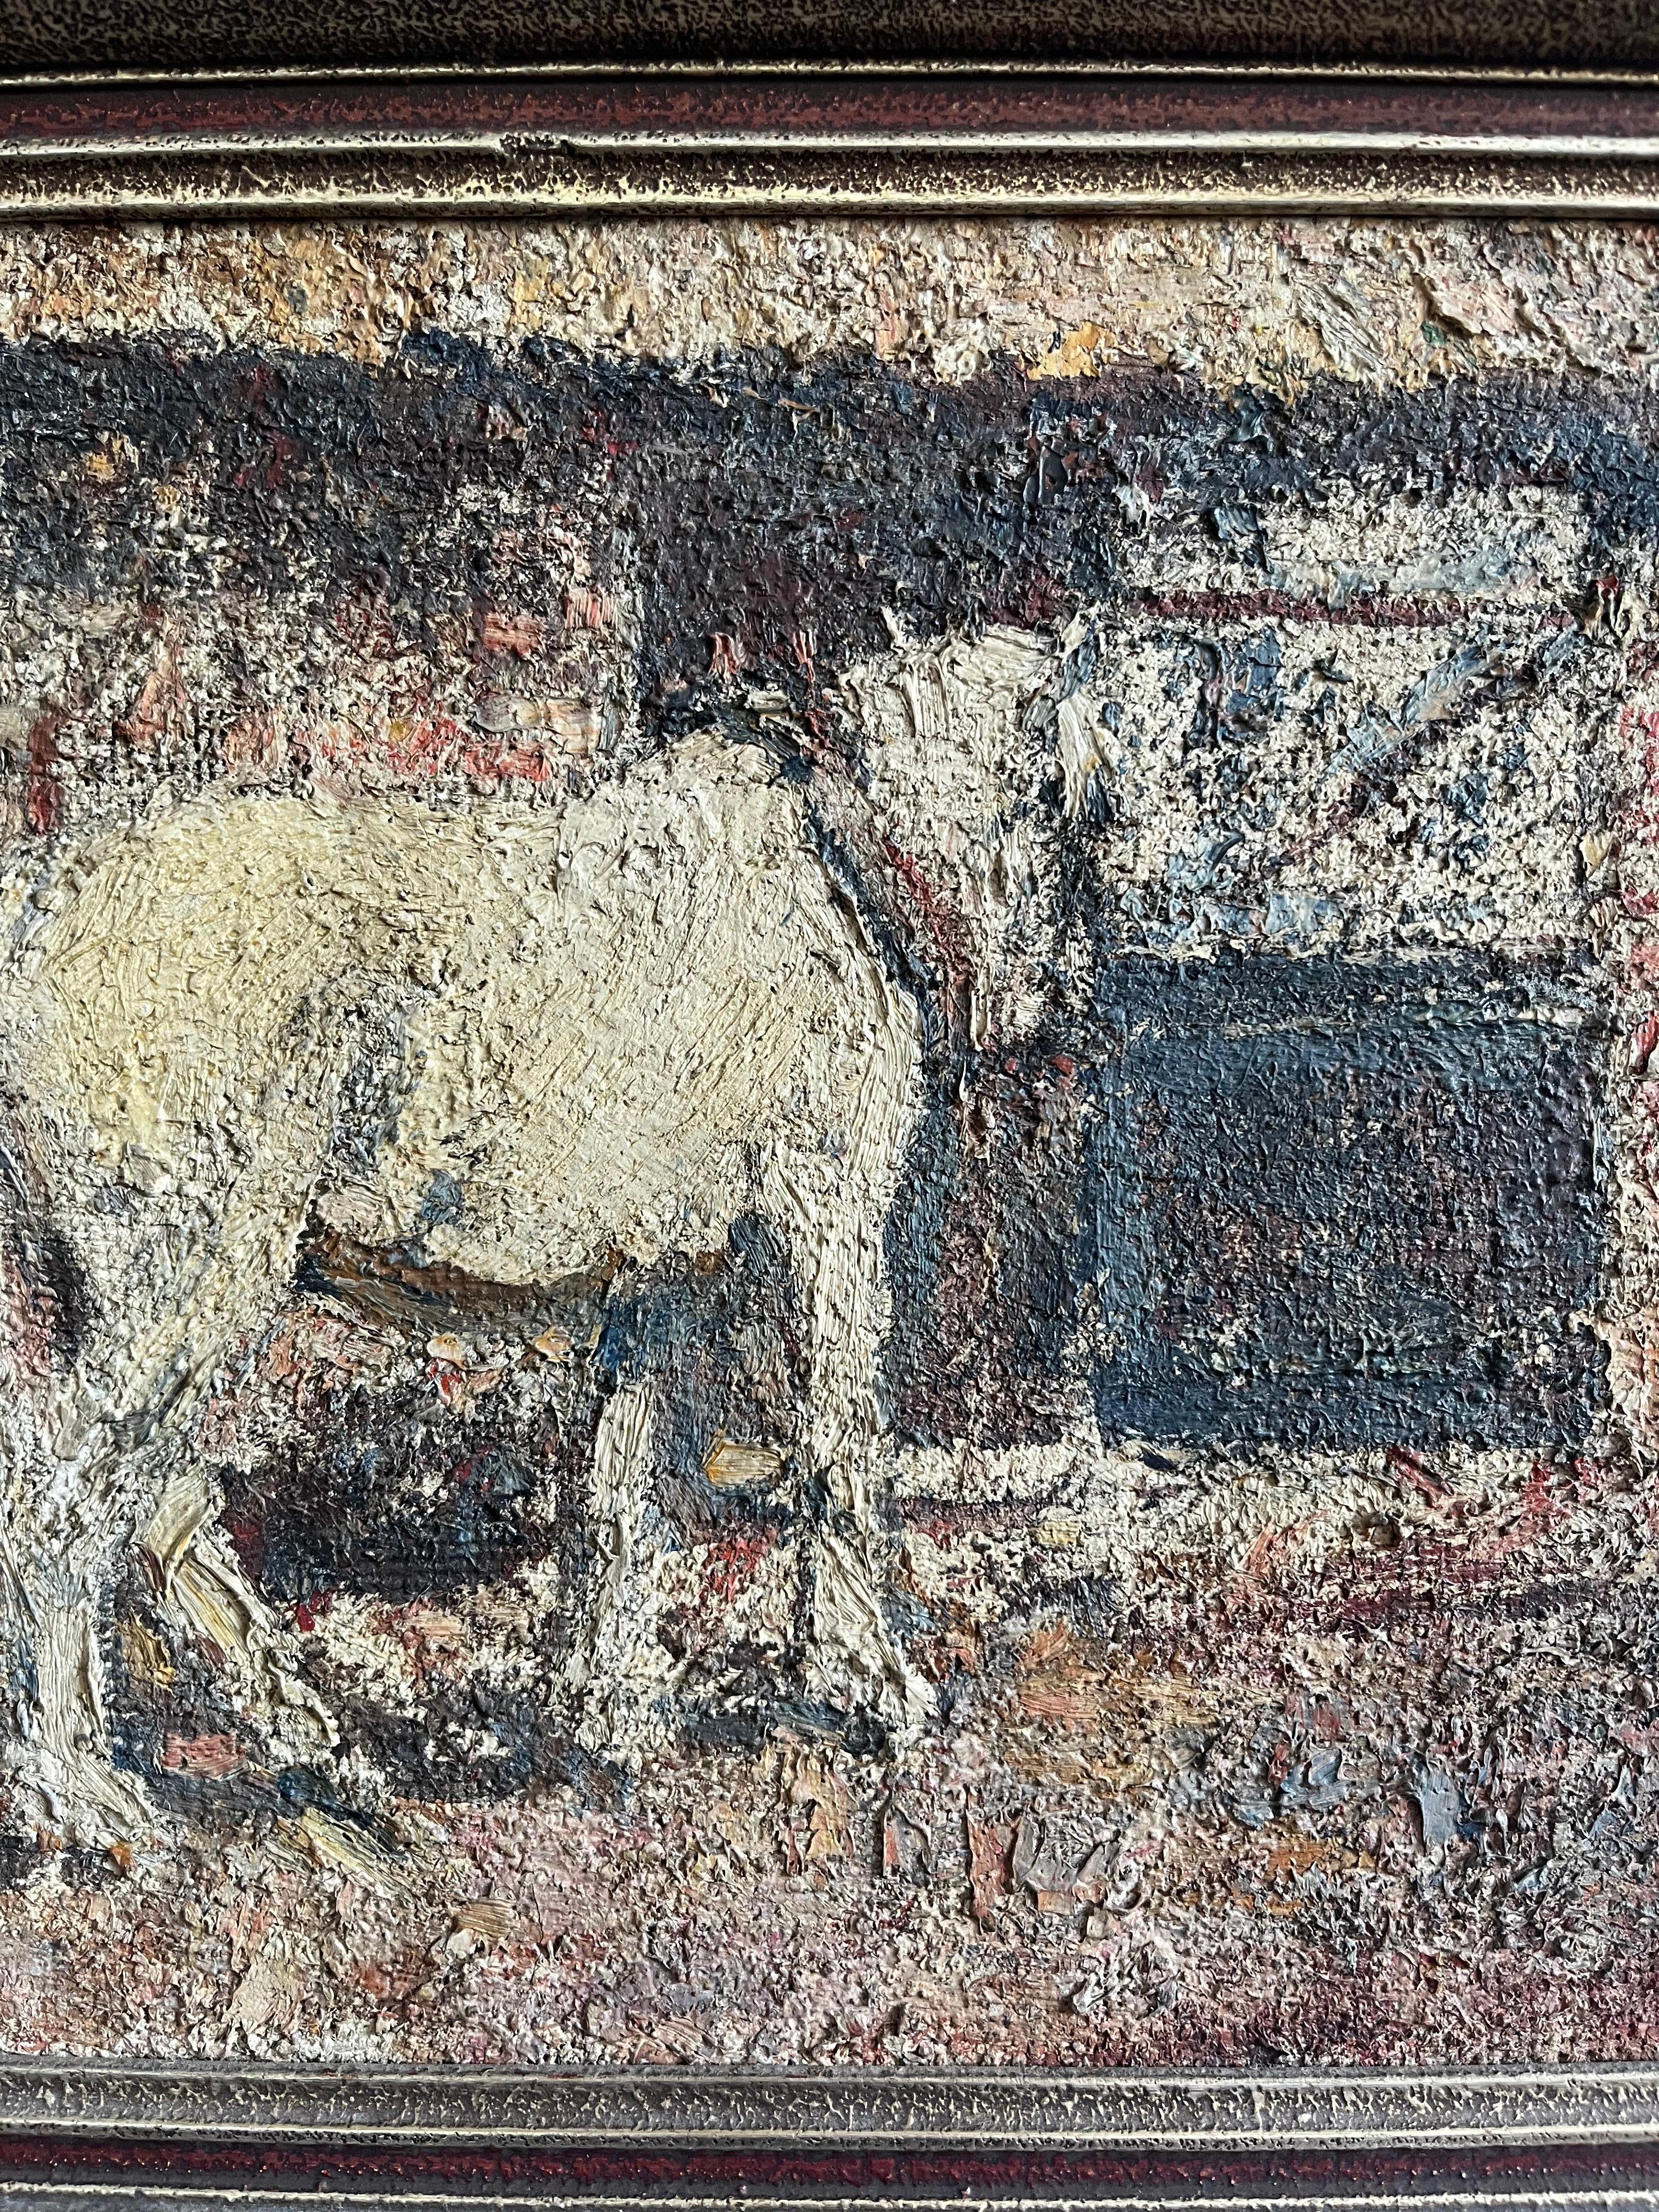 Harry Fidler, Impressionist study of a working Horse in farmyard For Sale 4